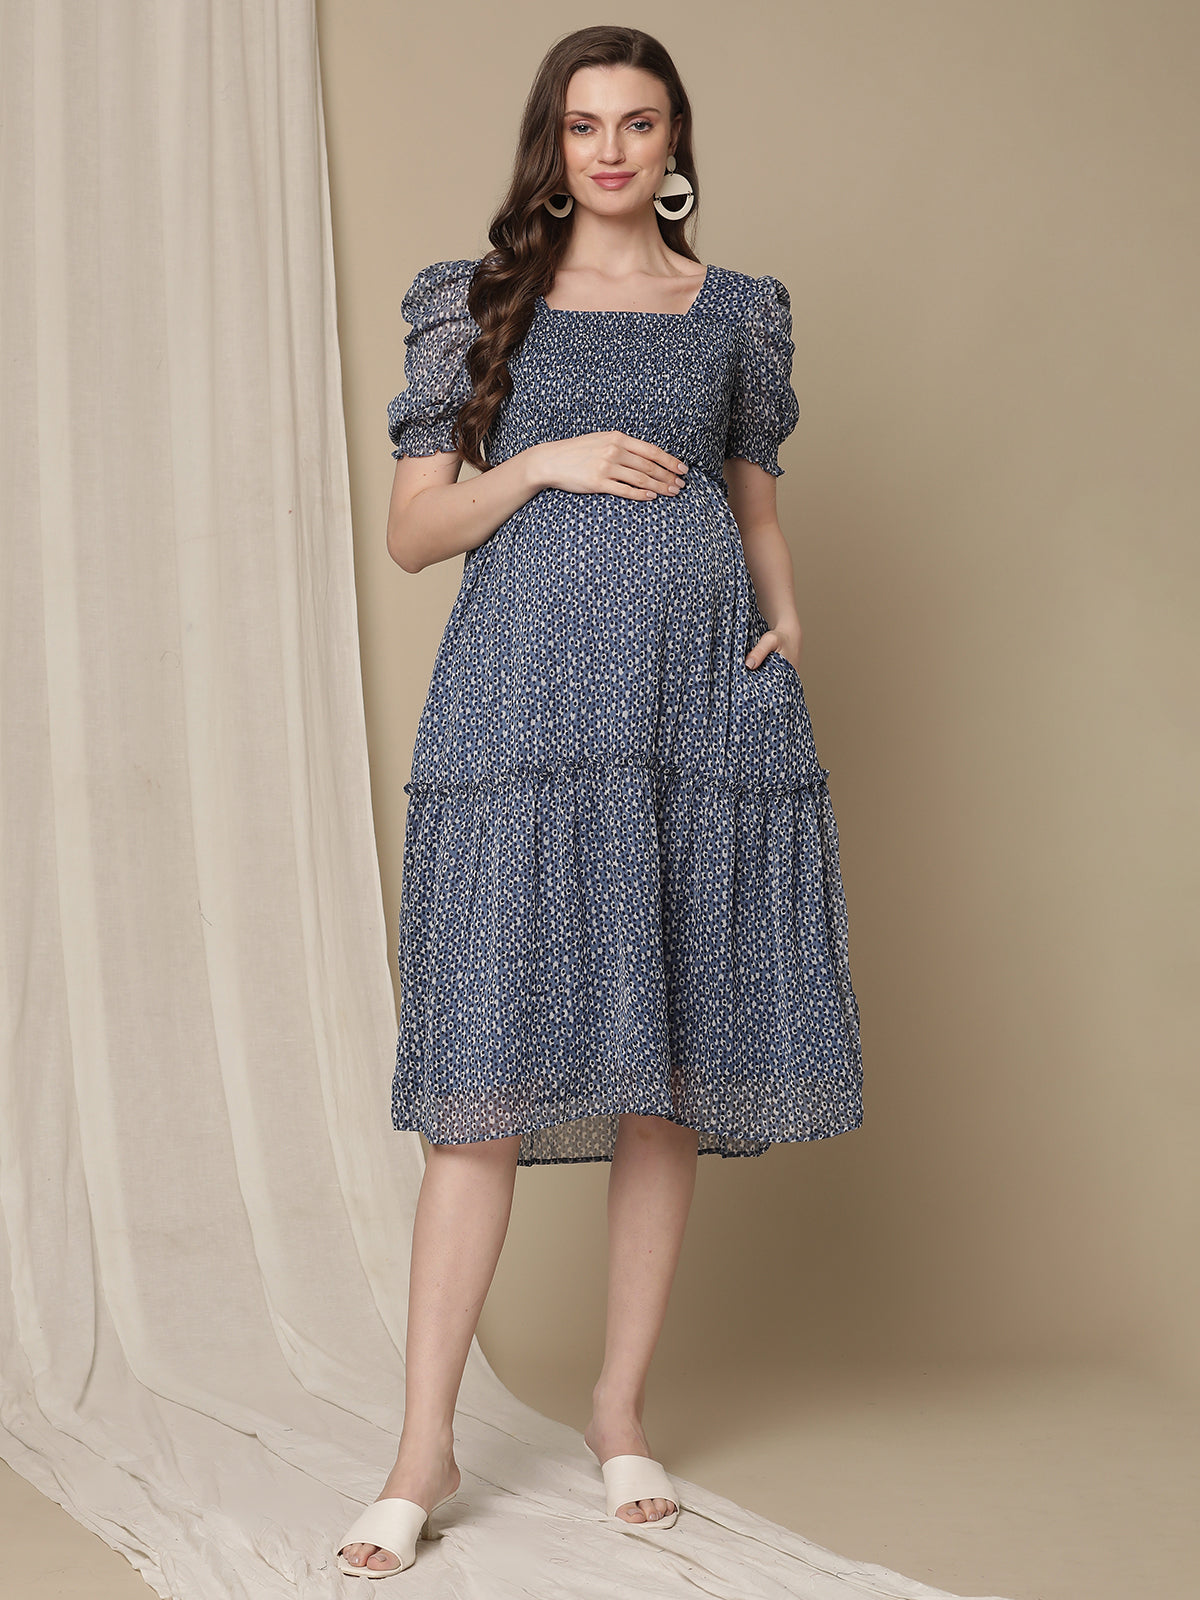 Comfortable Square Neck Elastic Maternity Dress with A-line Pattern -  Feeding Option Included - Suitable for Pregnancy Period | Mommies Maternity  Wear